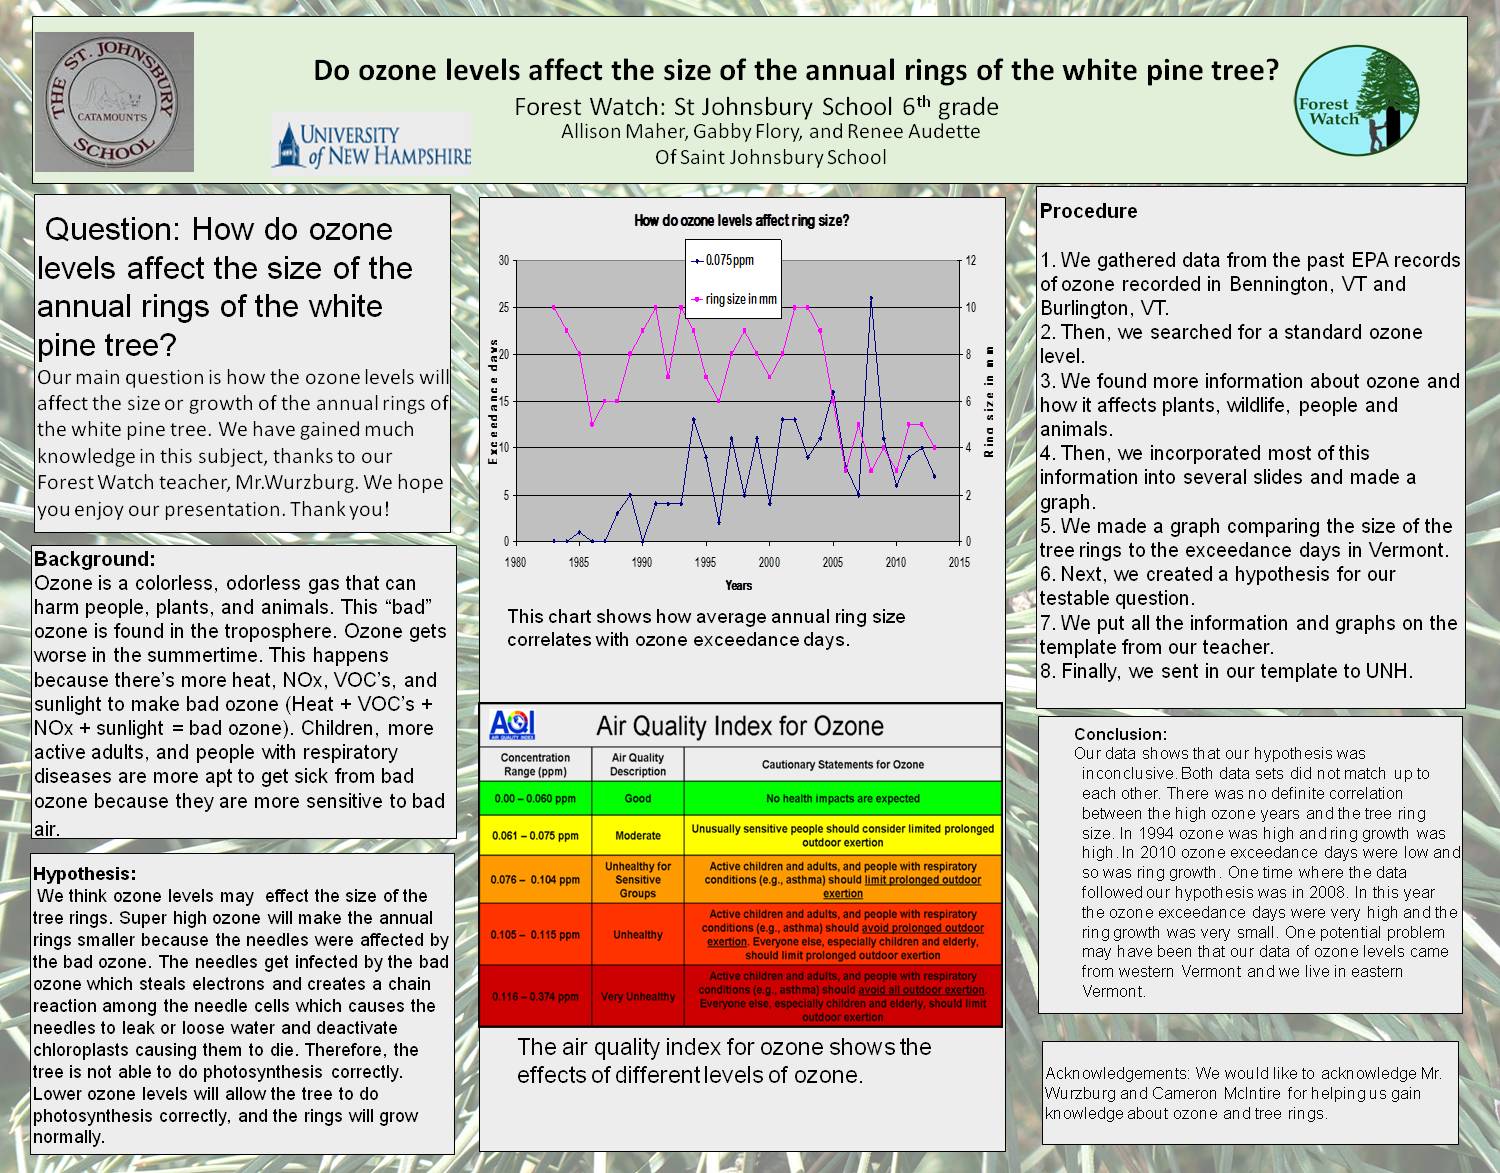 Do Ozone Levels Affect The Size Of The Annual Rings Of The White Pine Tree? by obwurzburg